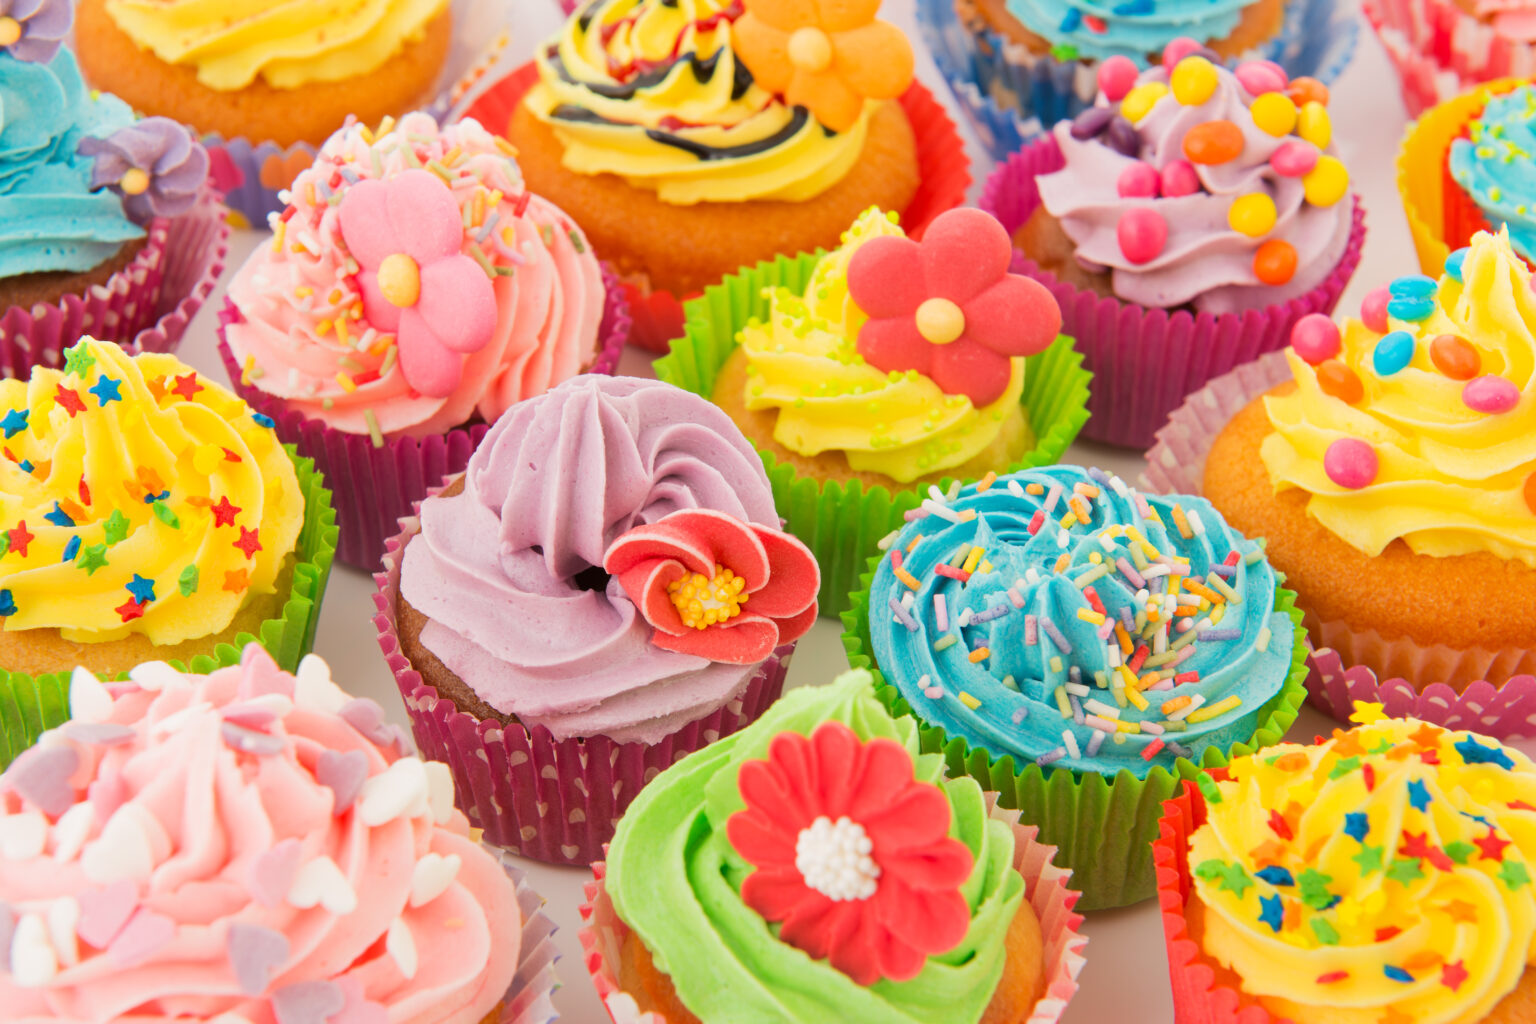 A group of cupcakes with colorful frosting and sprinkles.